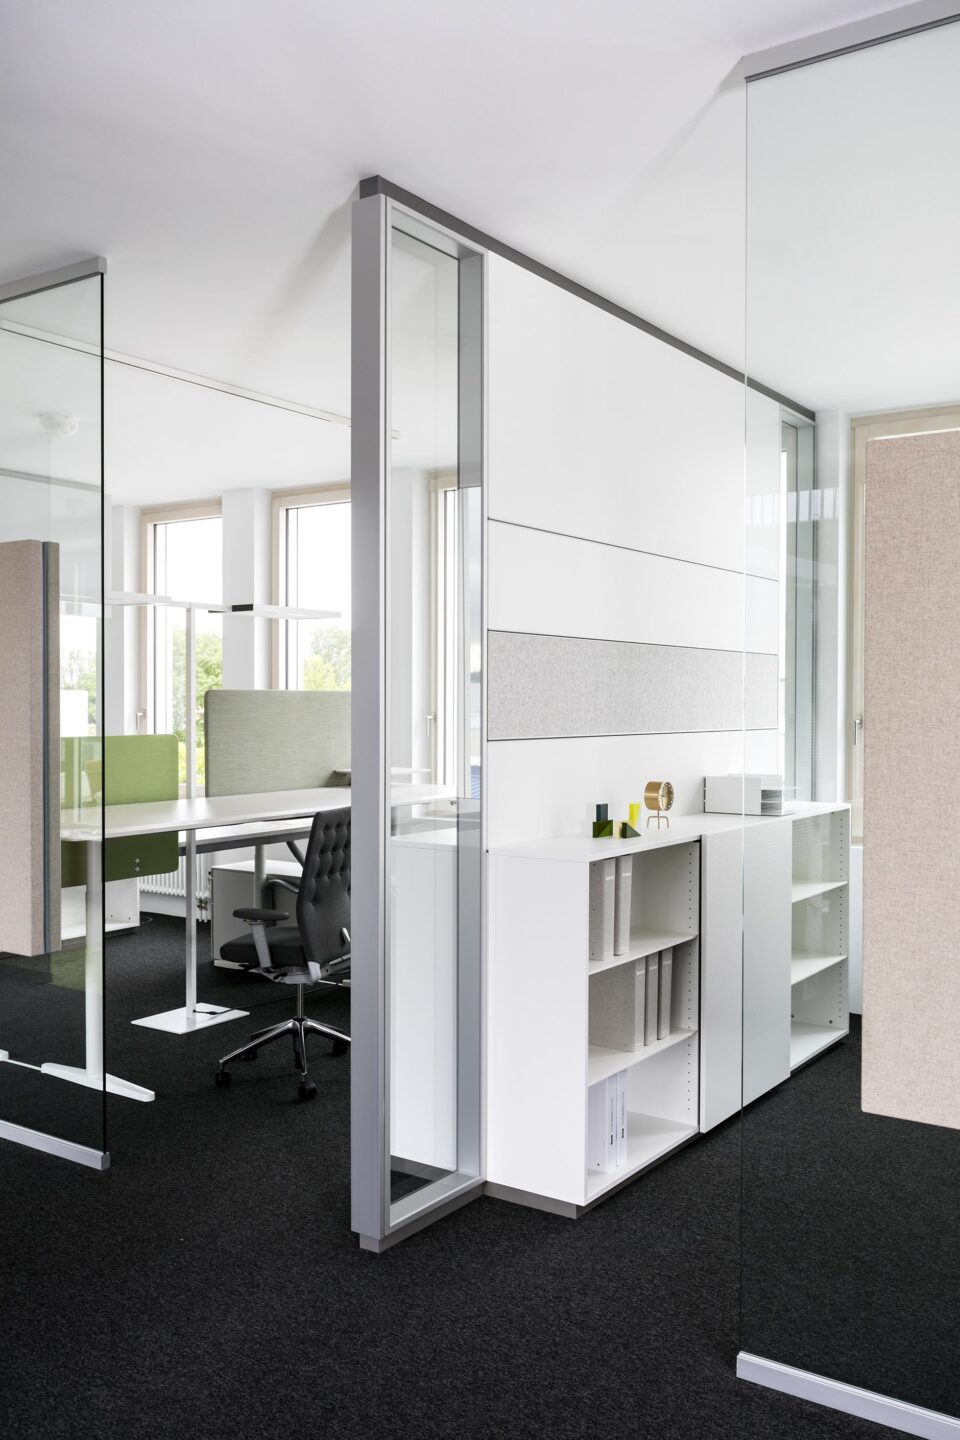 IdeenReich at feco-forum Karlsruhe │ modern workplaces │ glass walls from feco